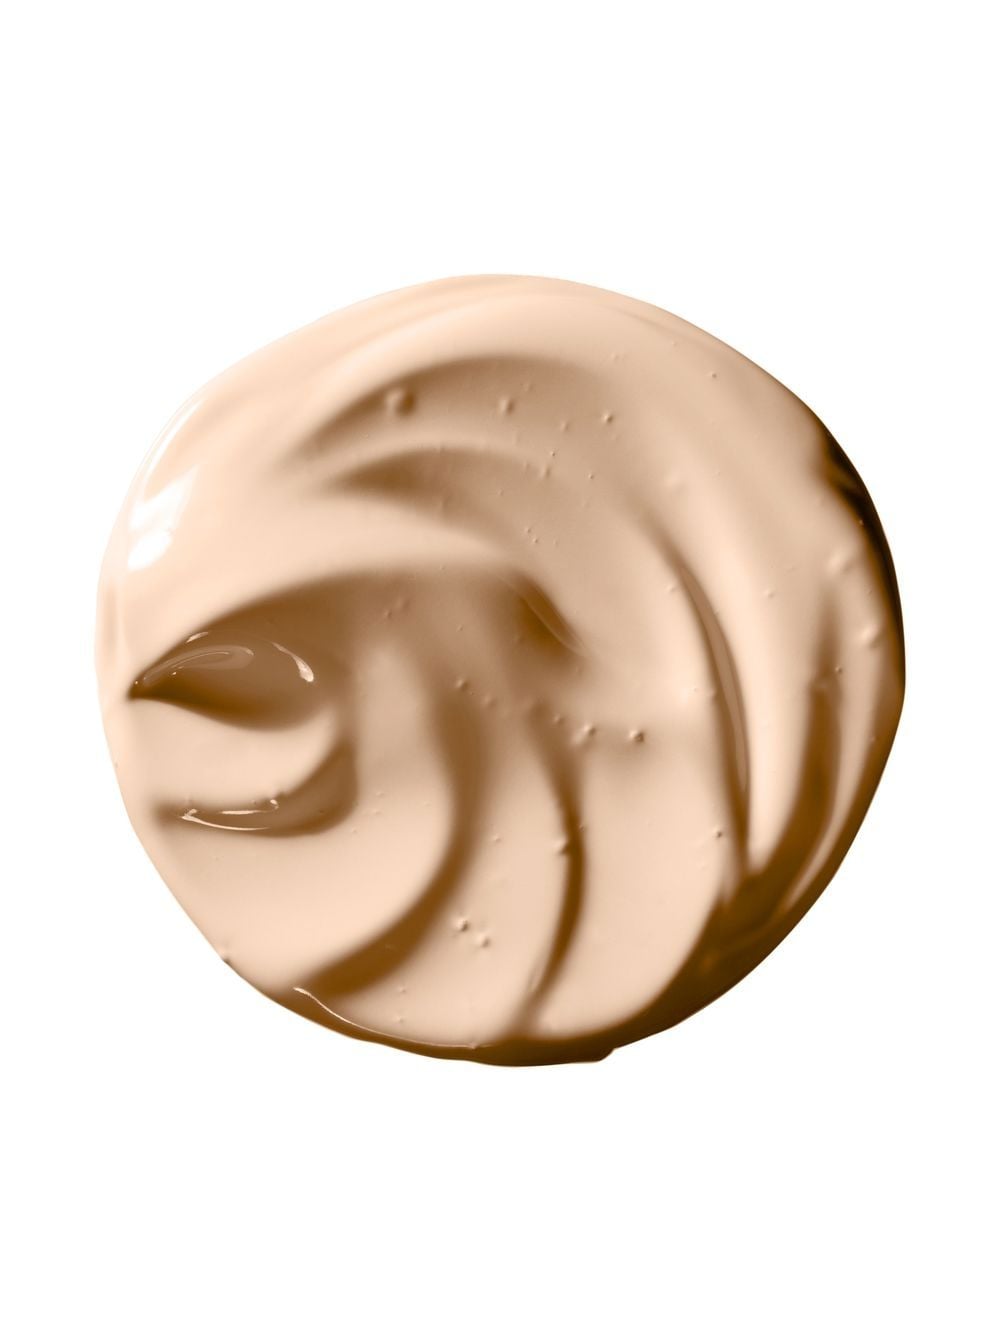 RMS Beauty "Re" Evolve Natural Finish foundation navulling - Beige